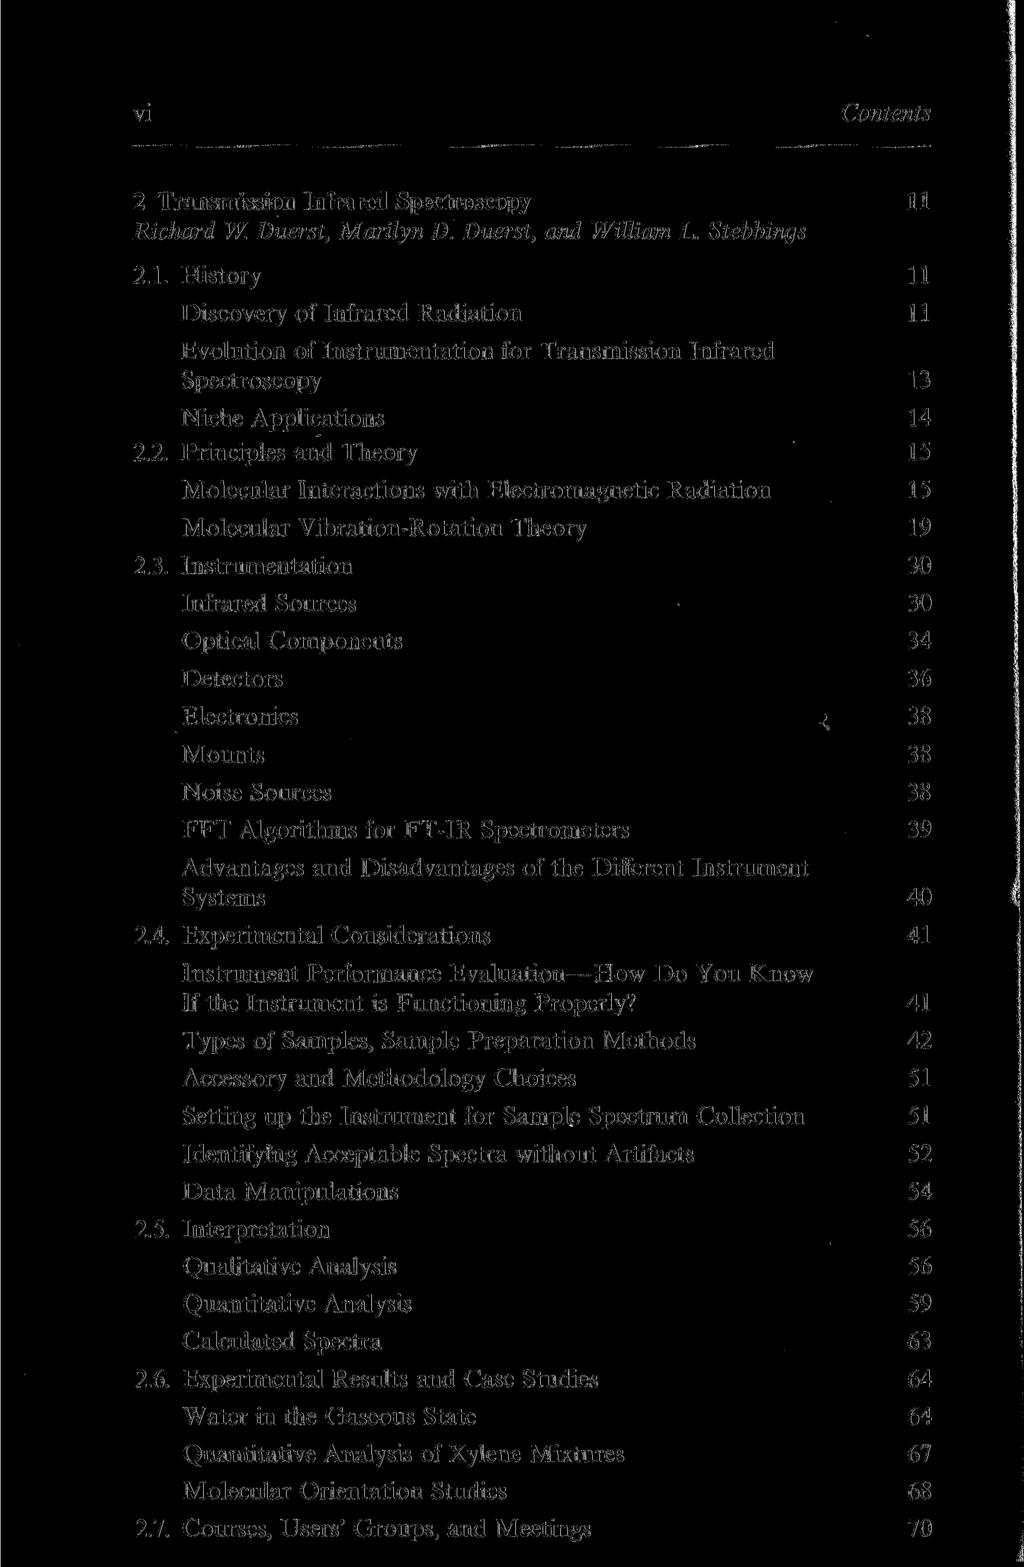 VI Contents 2 Transmission Infrared Spectroscopy 11 Richard W Duerst, Marilyn D. Duerst, and William L. Stebbings 2.1. History 11 Discovery of Infrared Radiation 11 Evolution of Instrumentation for Transmission Infrared Spectroscopy 13 Niche Applications 14 2.